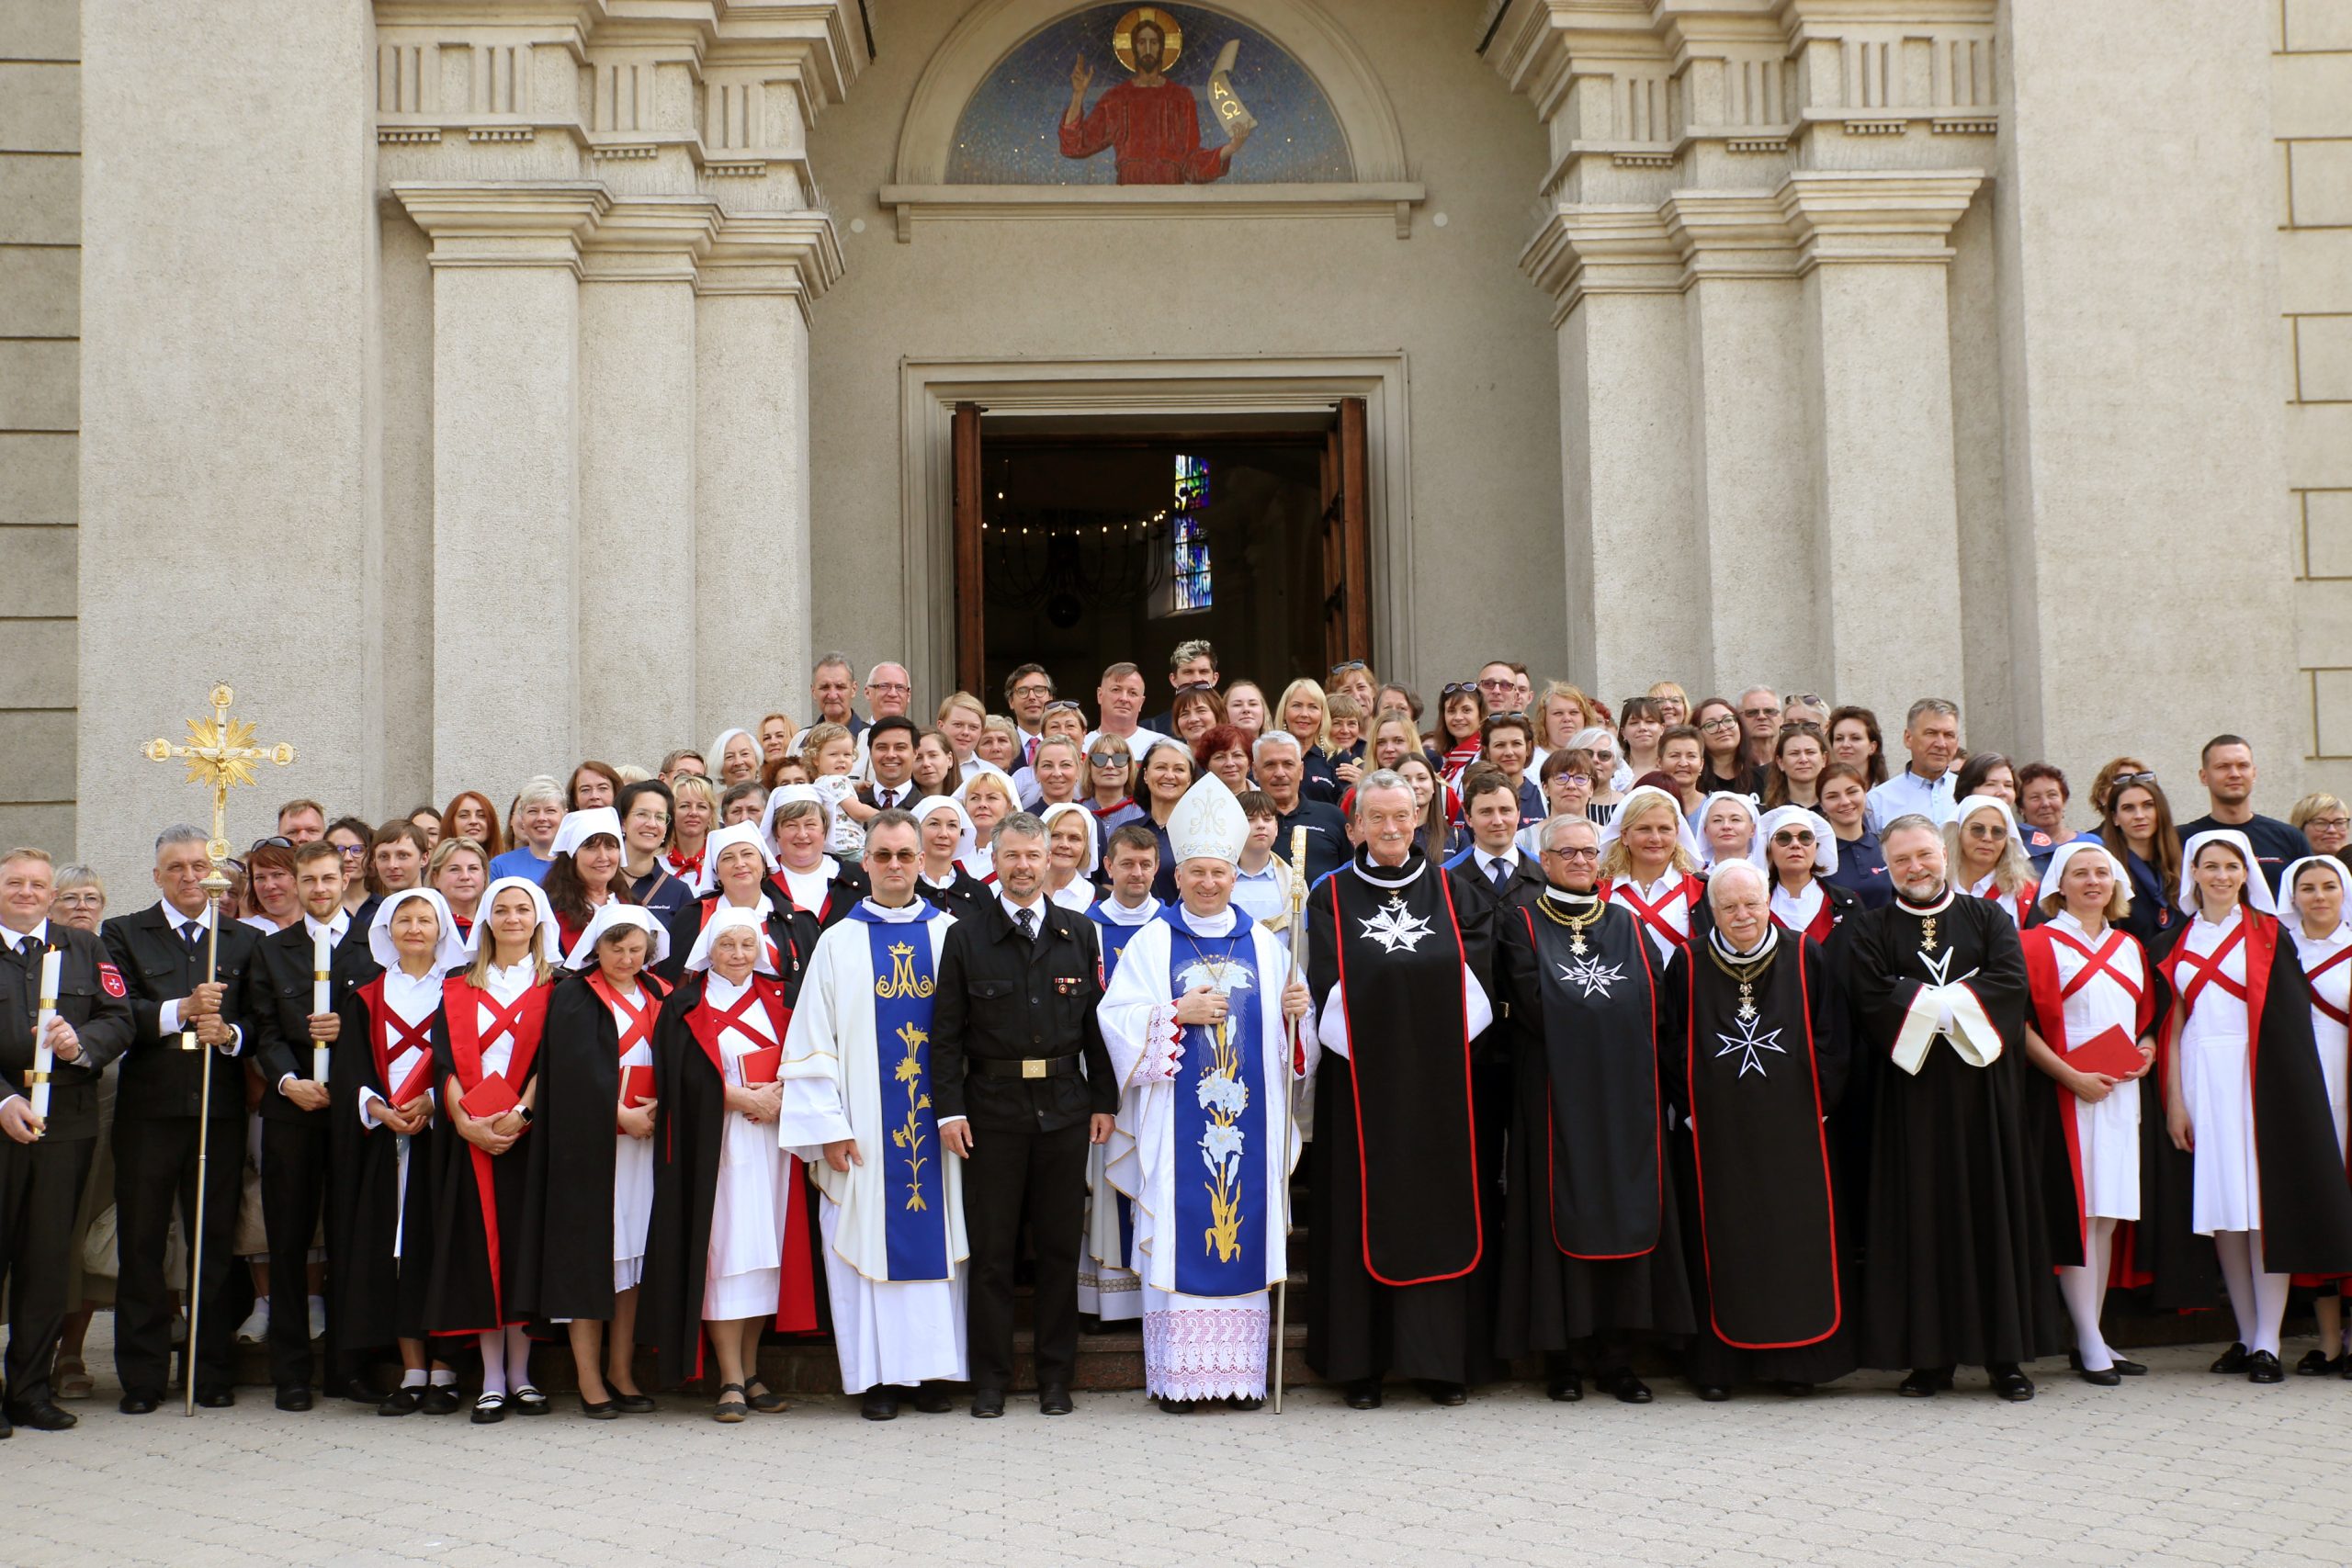 Solemn Promise to the Order of Malta